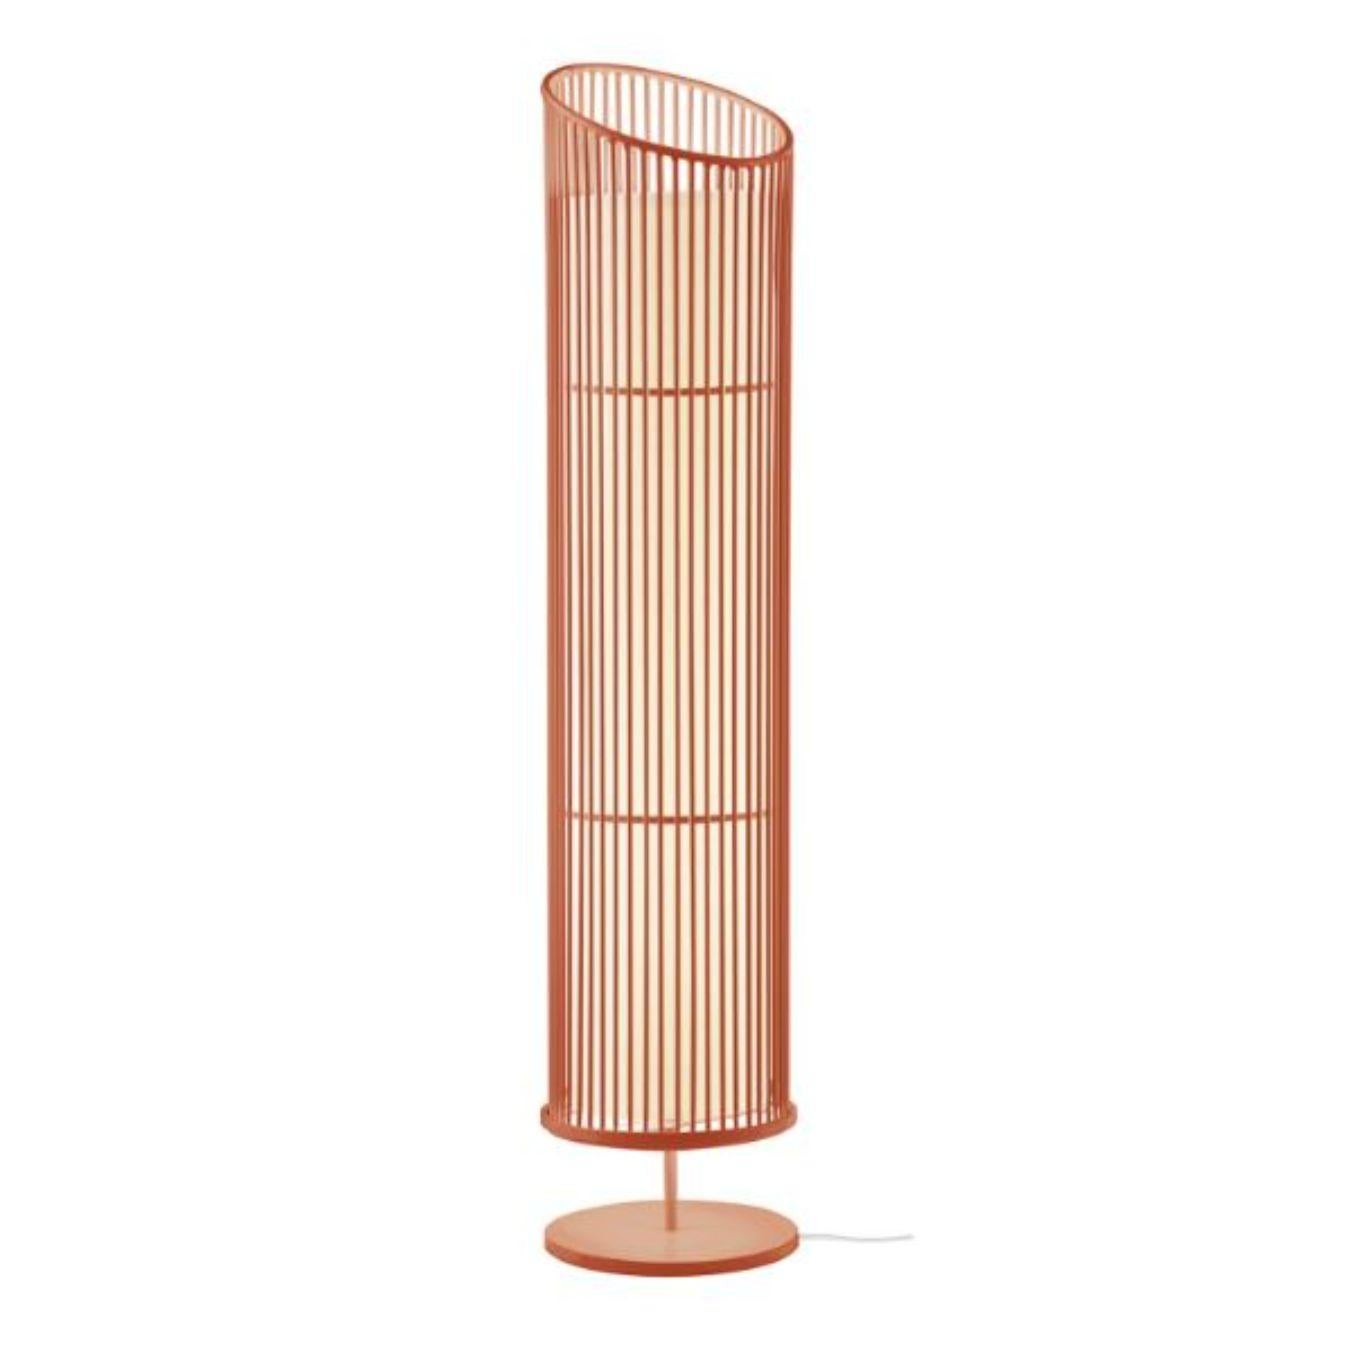 Salmon new spider floor lamp by Dooq
Dimensions: W 30 x D 30 x H 140 cm
Materials: lacquered metal, polished or brushed metal.
abat-jour: cotton
Also available in different colors and materials. 

Information:
230V/50Hz
E27/2x20W